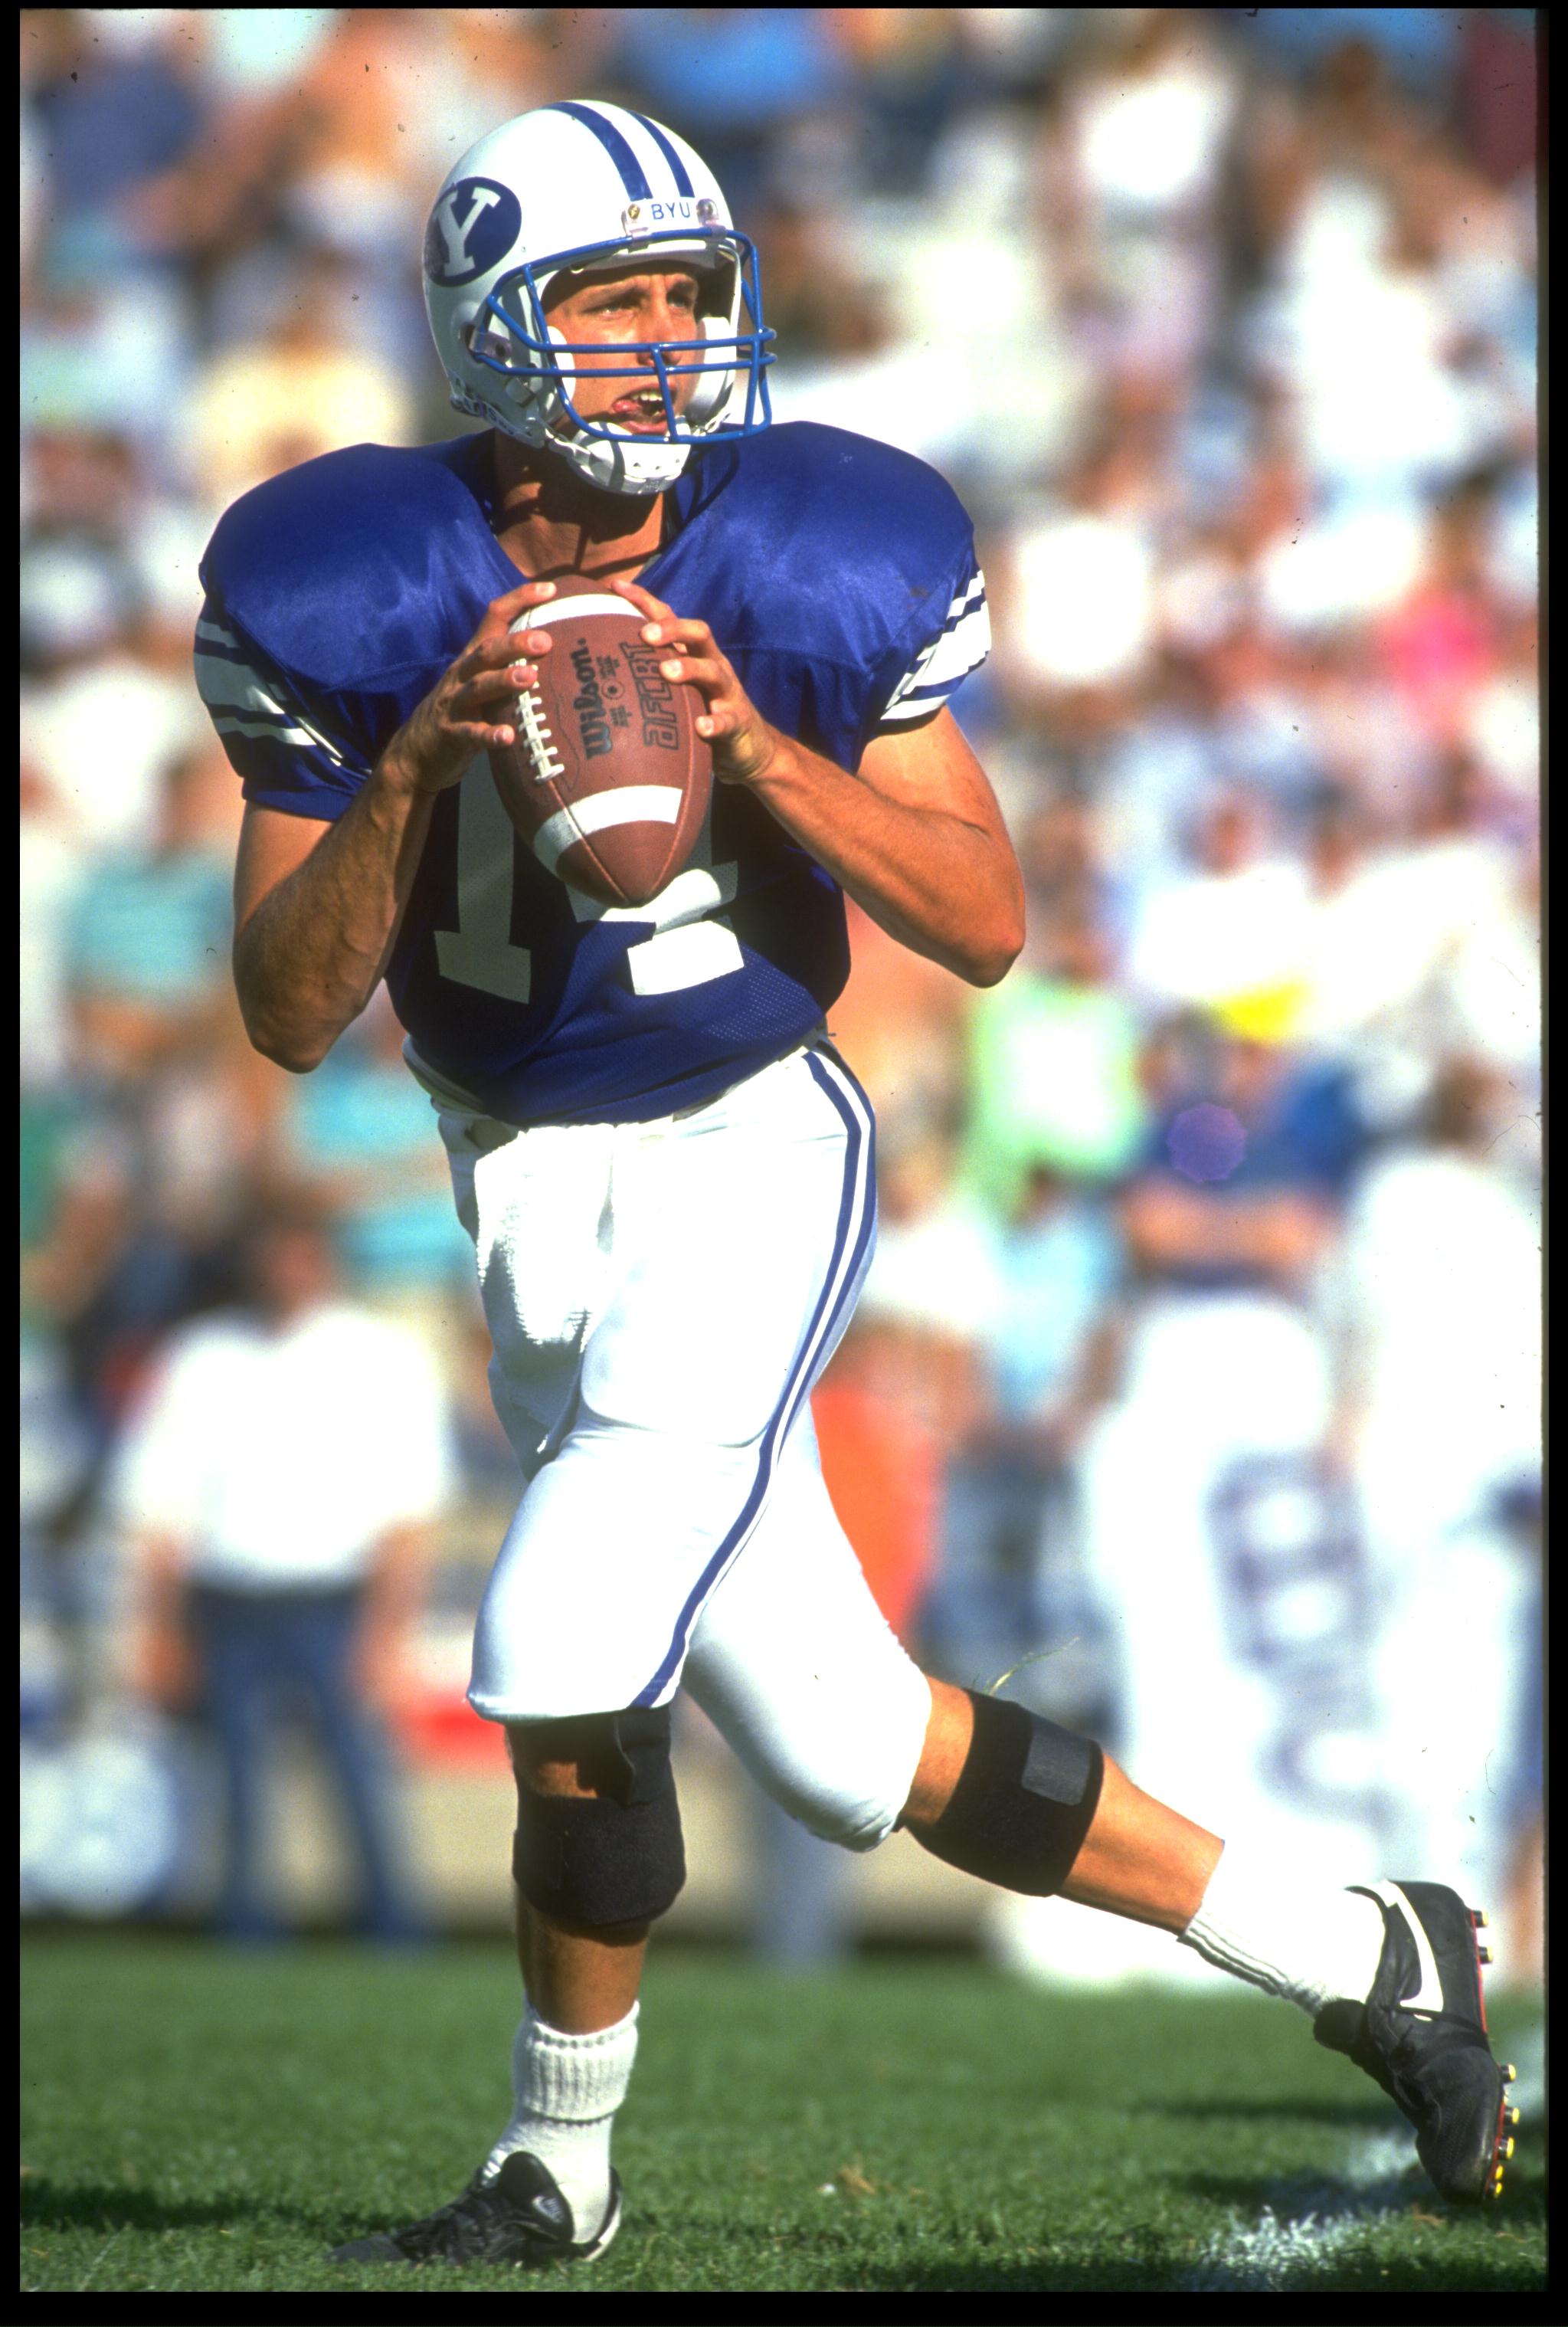 22 Sep 1990: BYU QUARTERBACK TY DETMER DROPS BACK TO PASS DURING THE COURGARS 62-34 WIN OVER THE SAN DIEGO STATE AZTECS